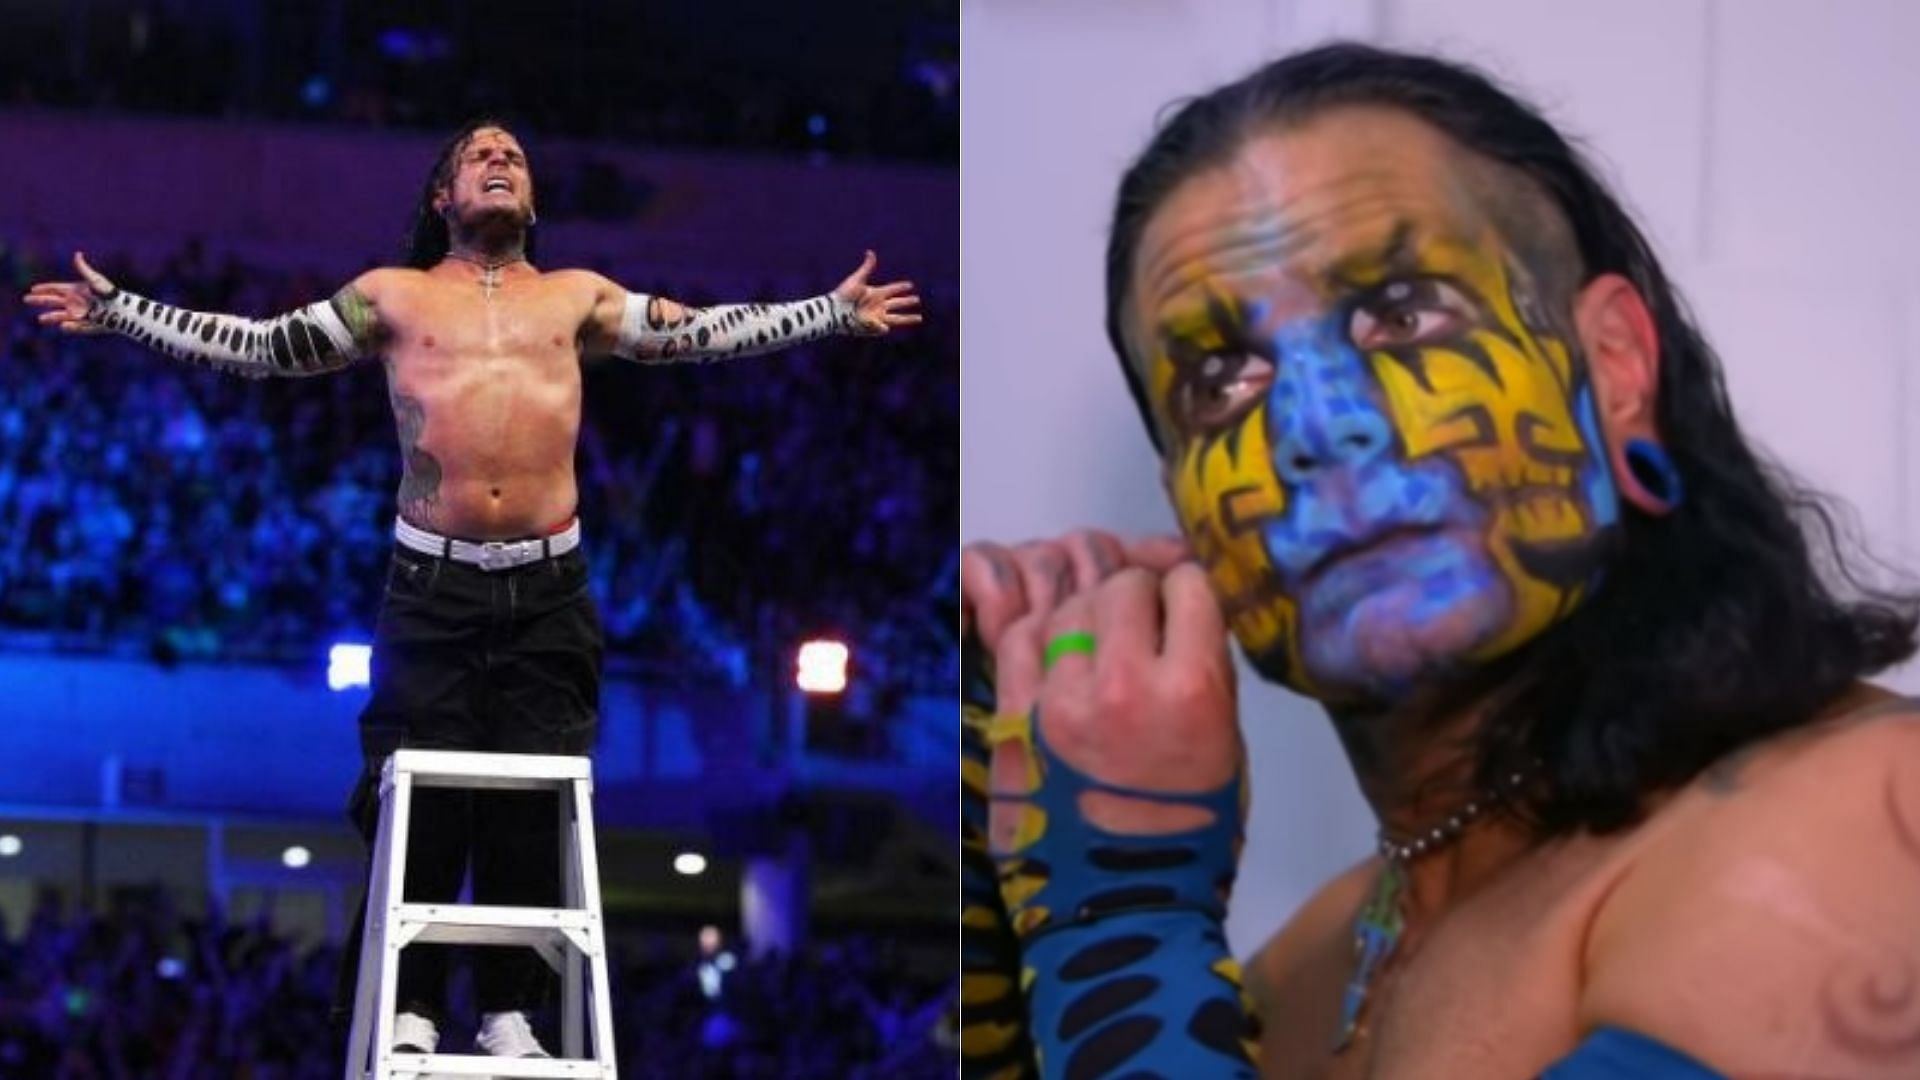 Jeff Hardy has used the Swanton Bomb for over 20 years